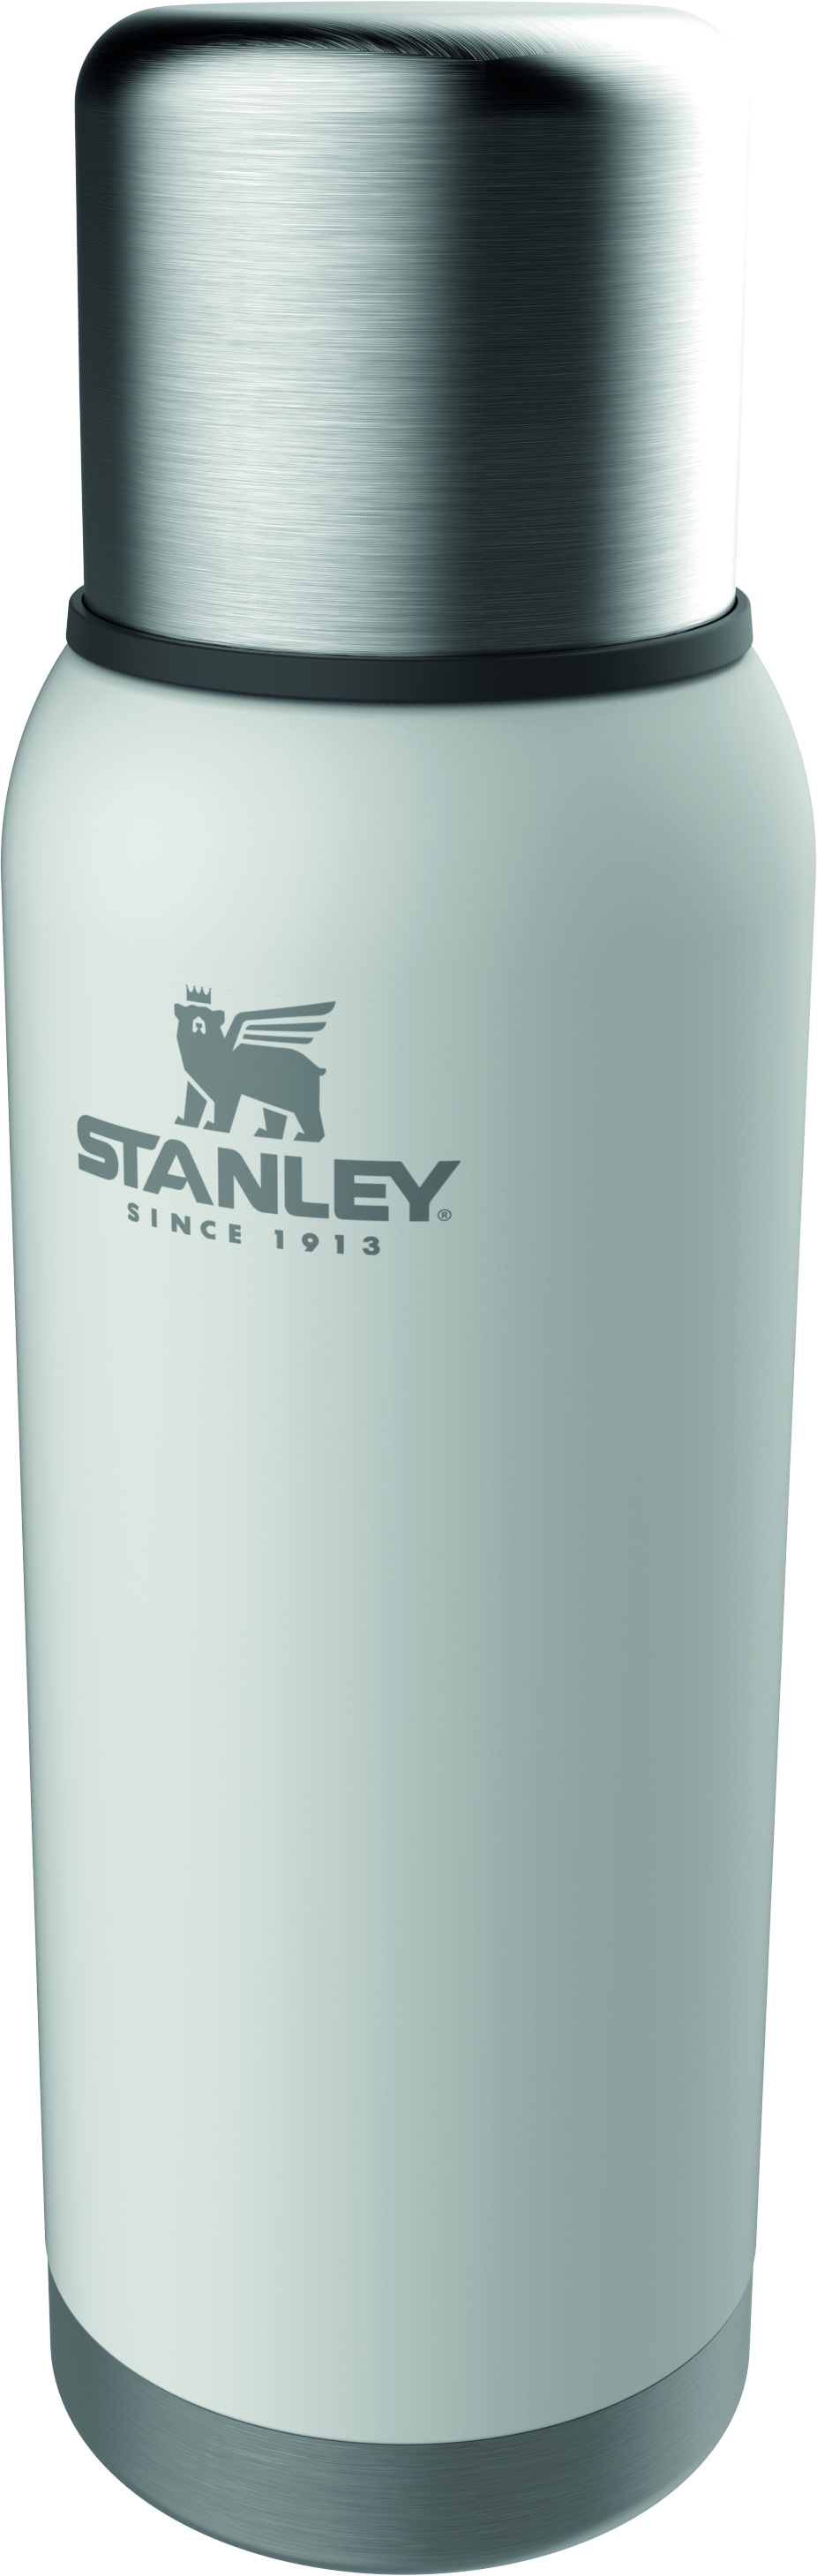 https://promotionway.com/data/shopproducts/1895/stanley-adventure-stainless-steel-vacuum-bottle-1l.jpg